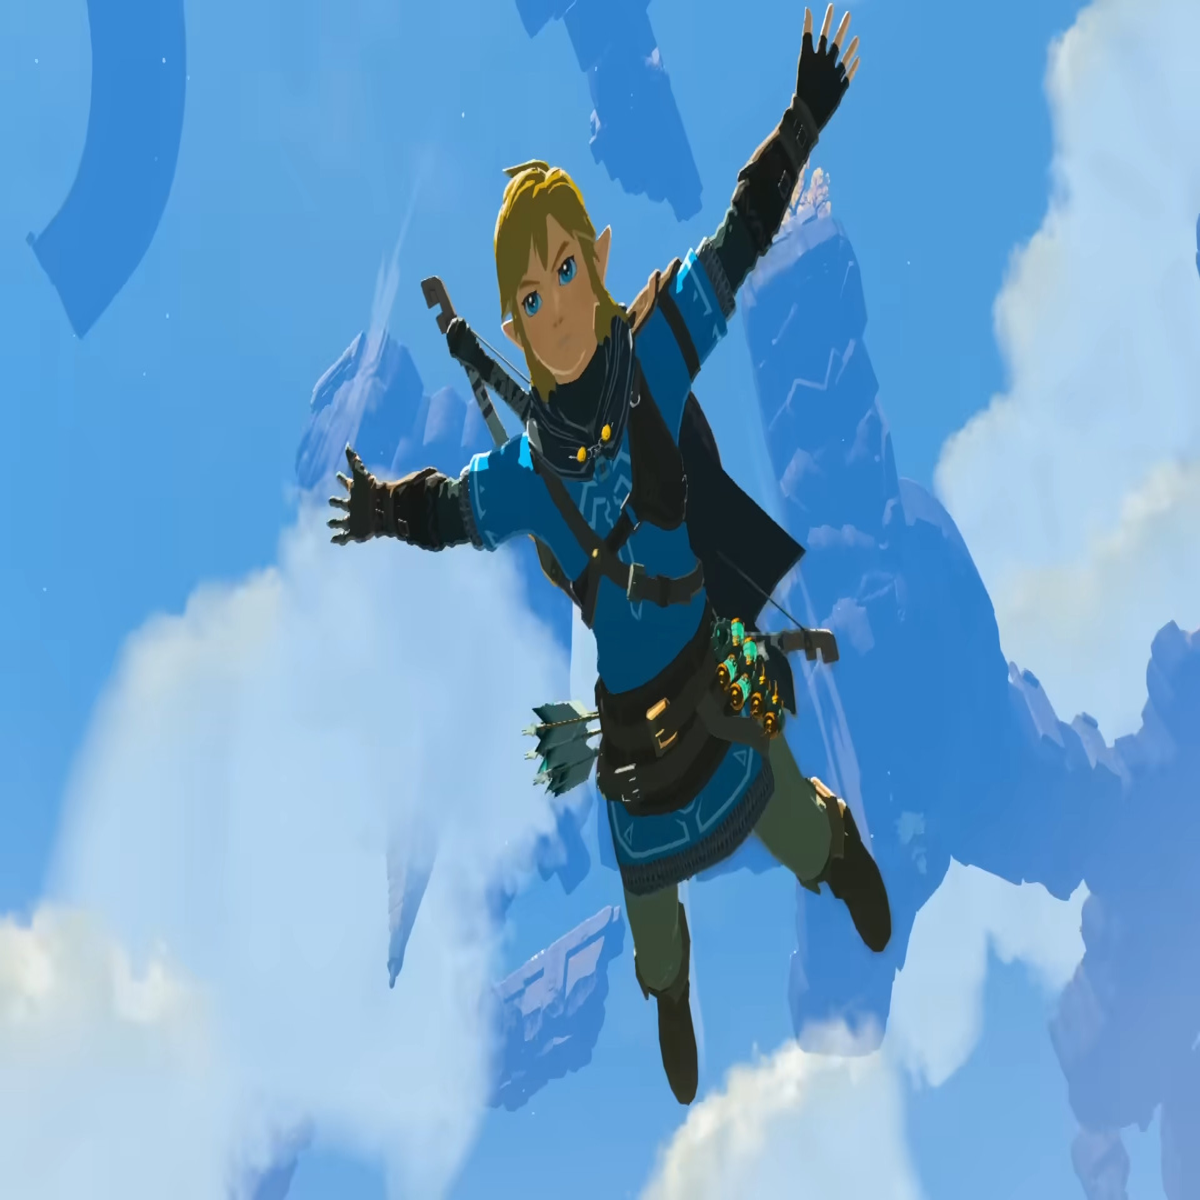 Zelda: Breath of the Wild sets Metacritic record for most amount